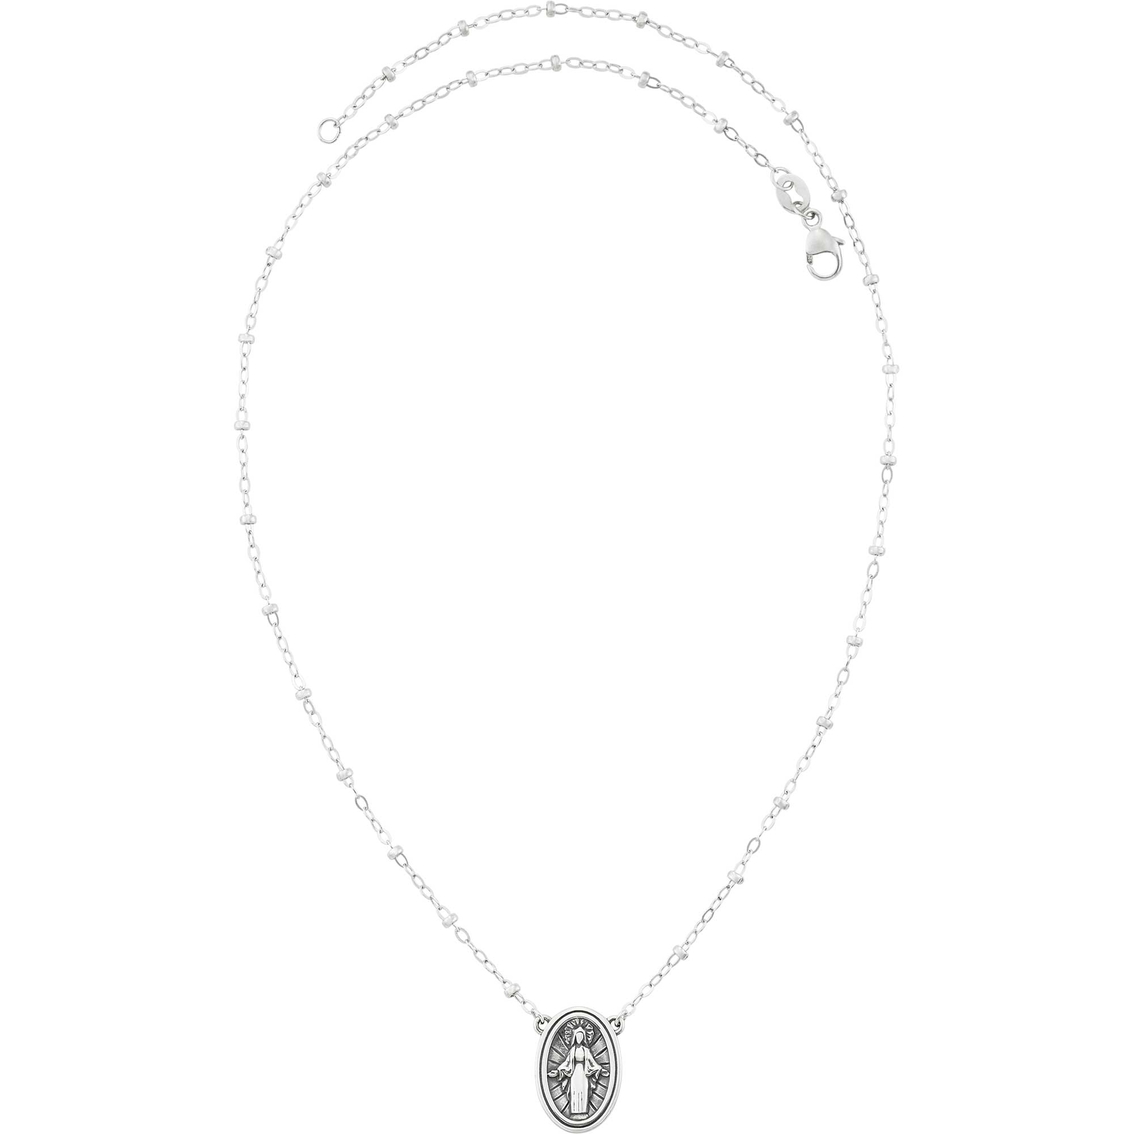 James Avery Virgin Mary Necklace - Image 2 of 2